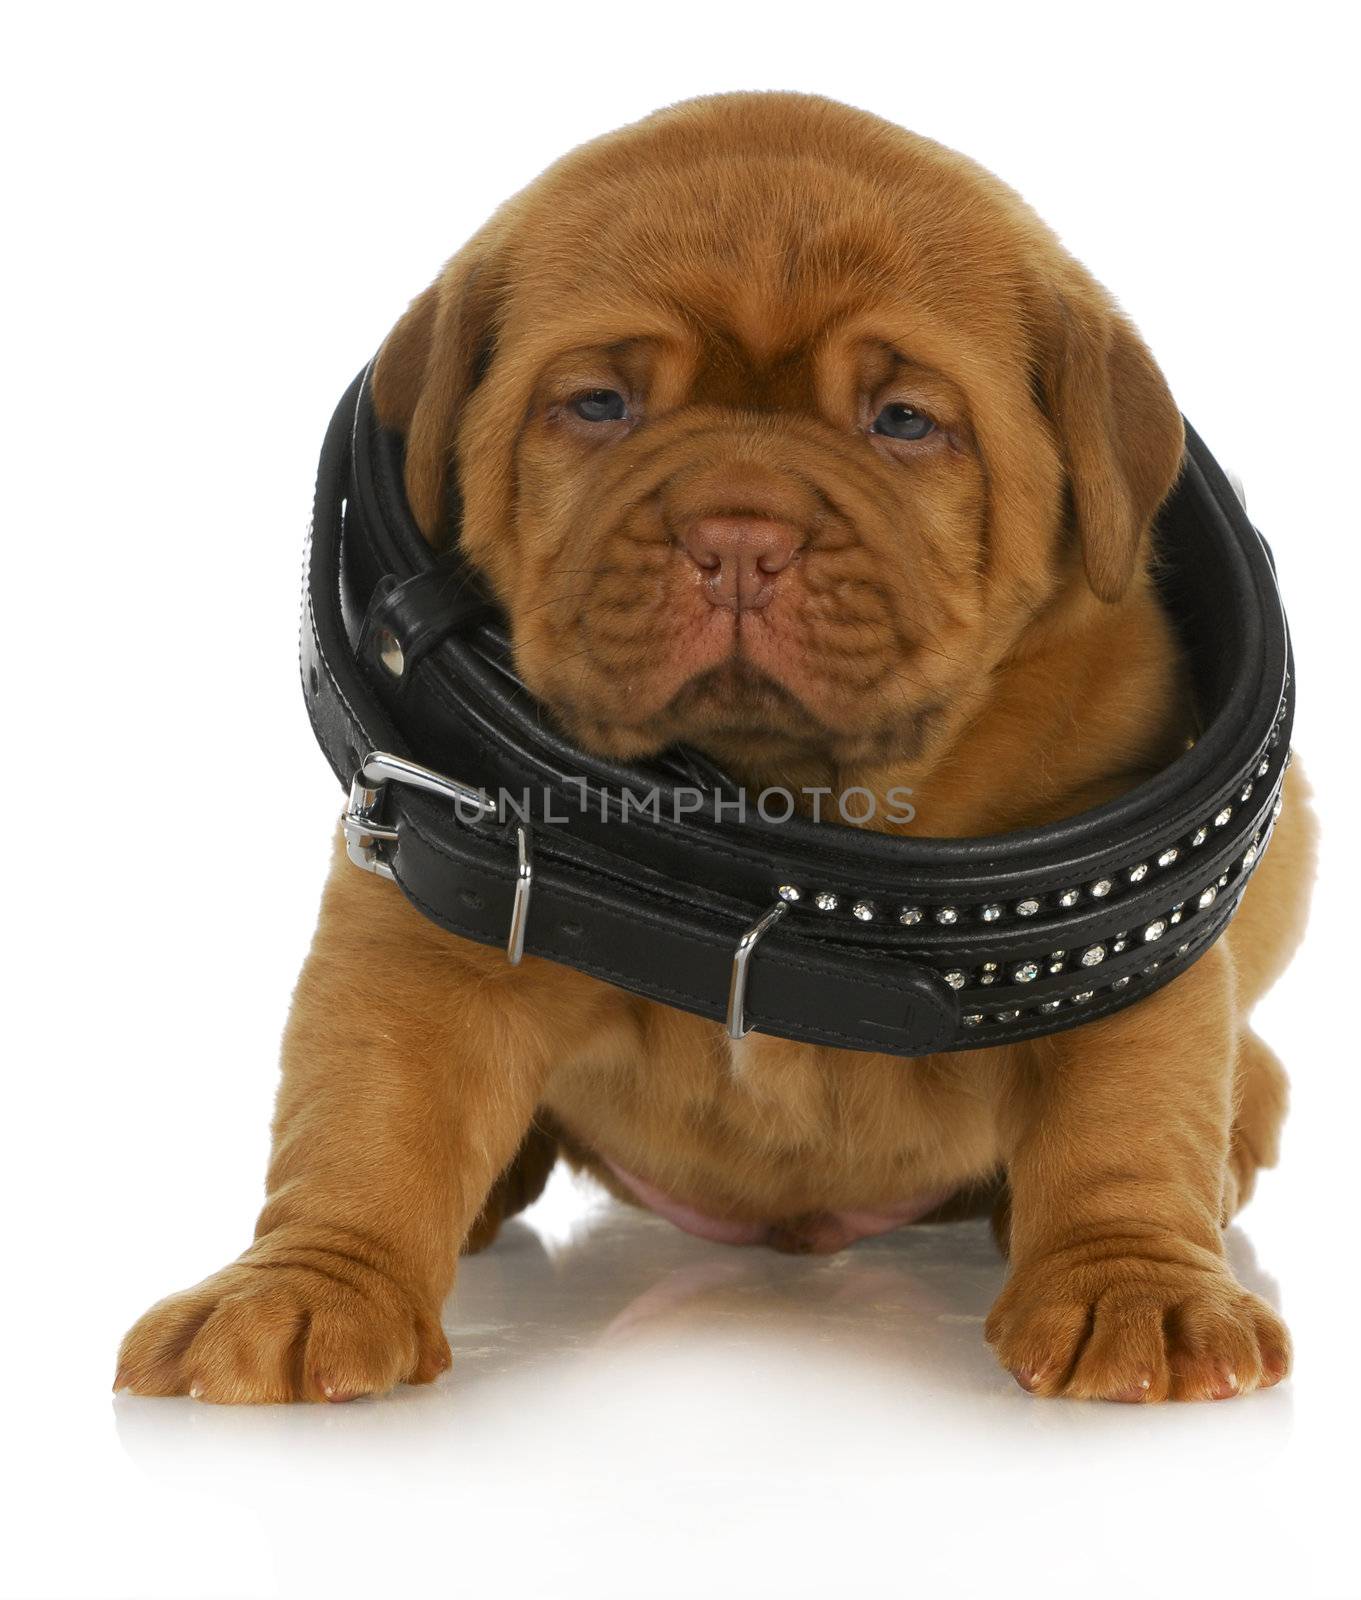 puppy growth - dogue de bordeaux puppy wearing dog collar that is too big - 4 weeks old